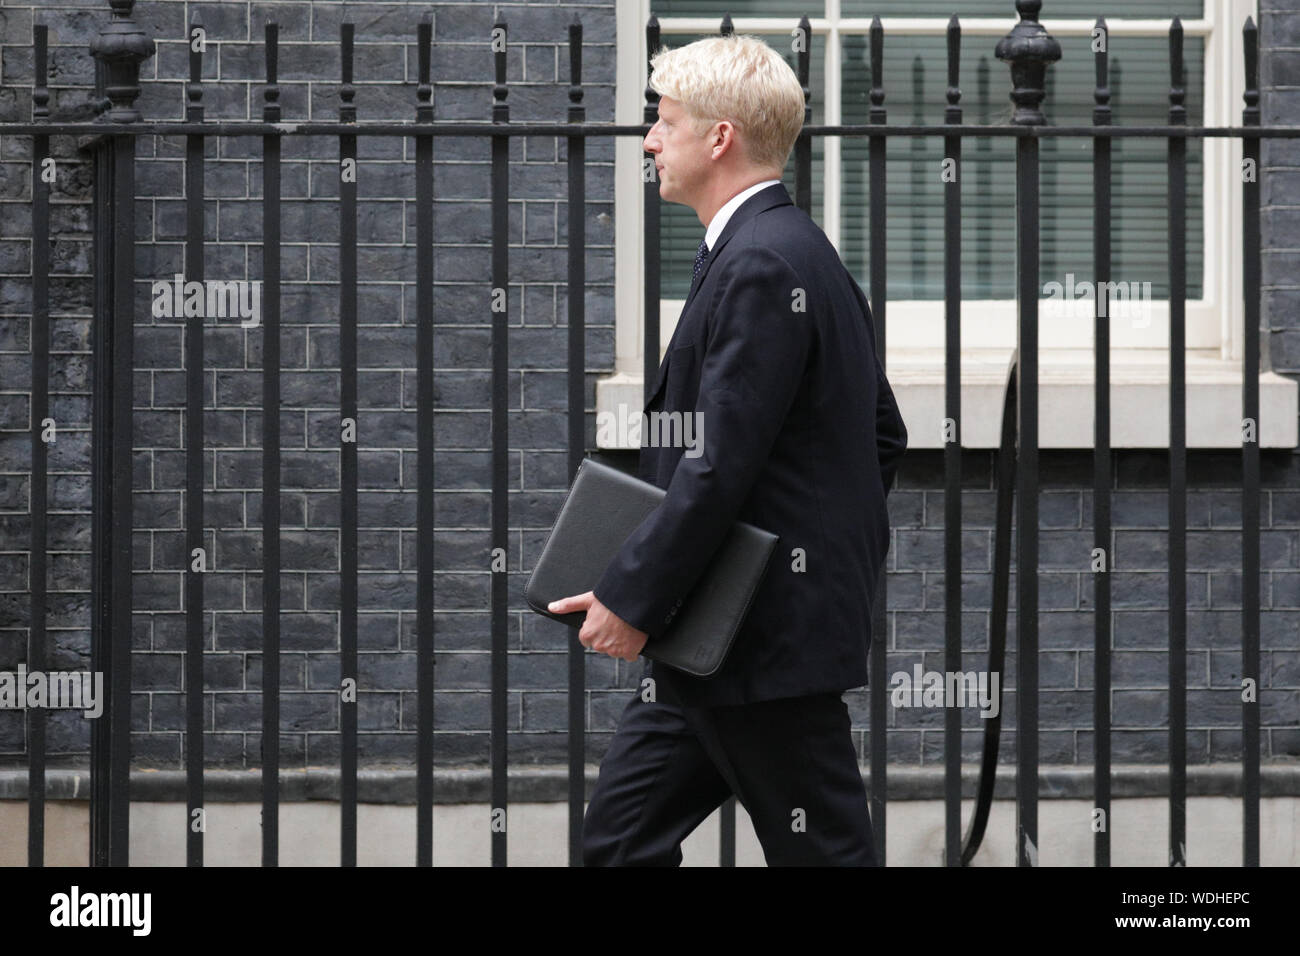 Westminster, London, UK. 29th Aug, 2019. Jo Johnson, Minister for Universities and Science and PM Boris Johnson's brother, enters No 10 Downing Street this evening. Credit: Imageplotter/Alamy Live News Stock Photo